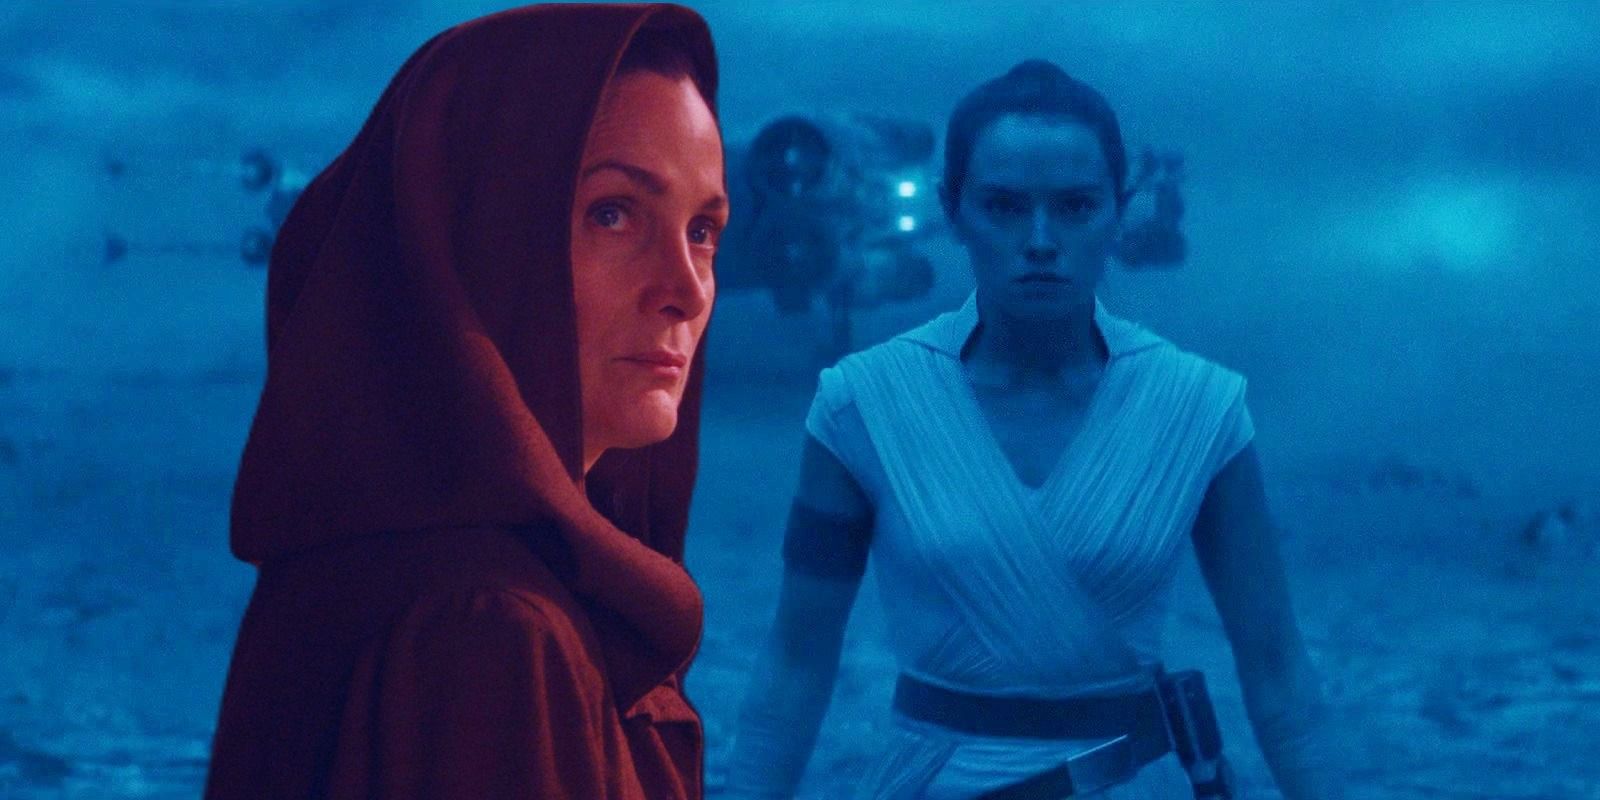 Rey in The Rise of Skywalker to the right in a blue hue and Carrie-Anne Moss as Indara in the Acolyte trailer to the left in a red hue